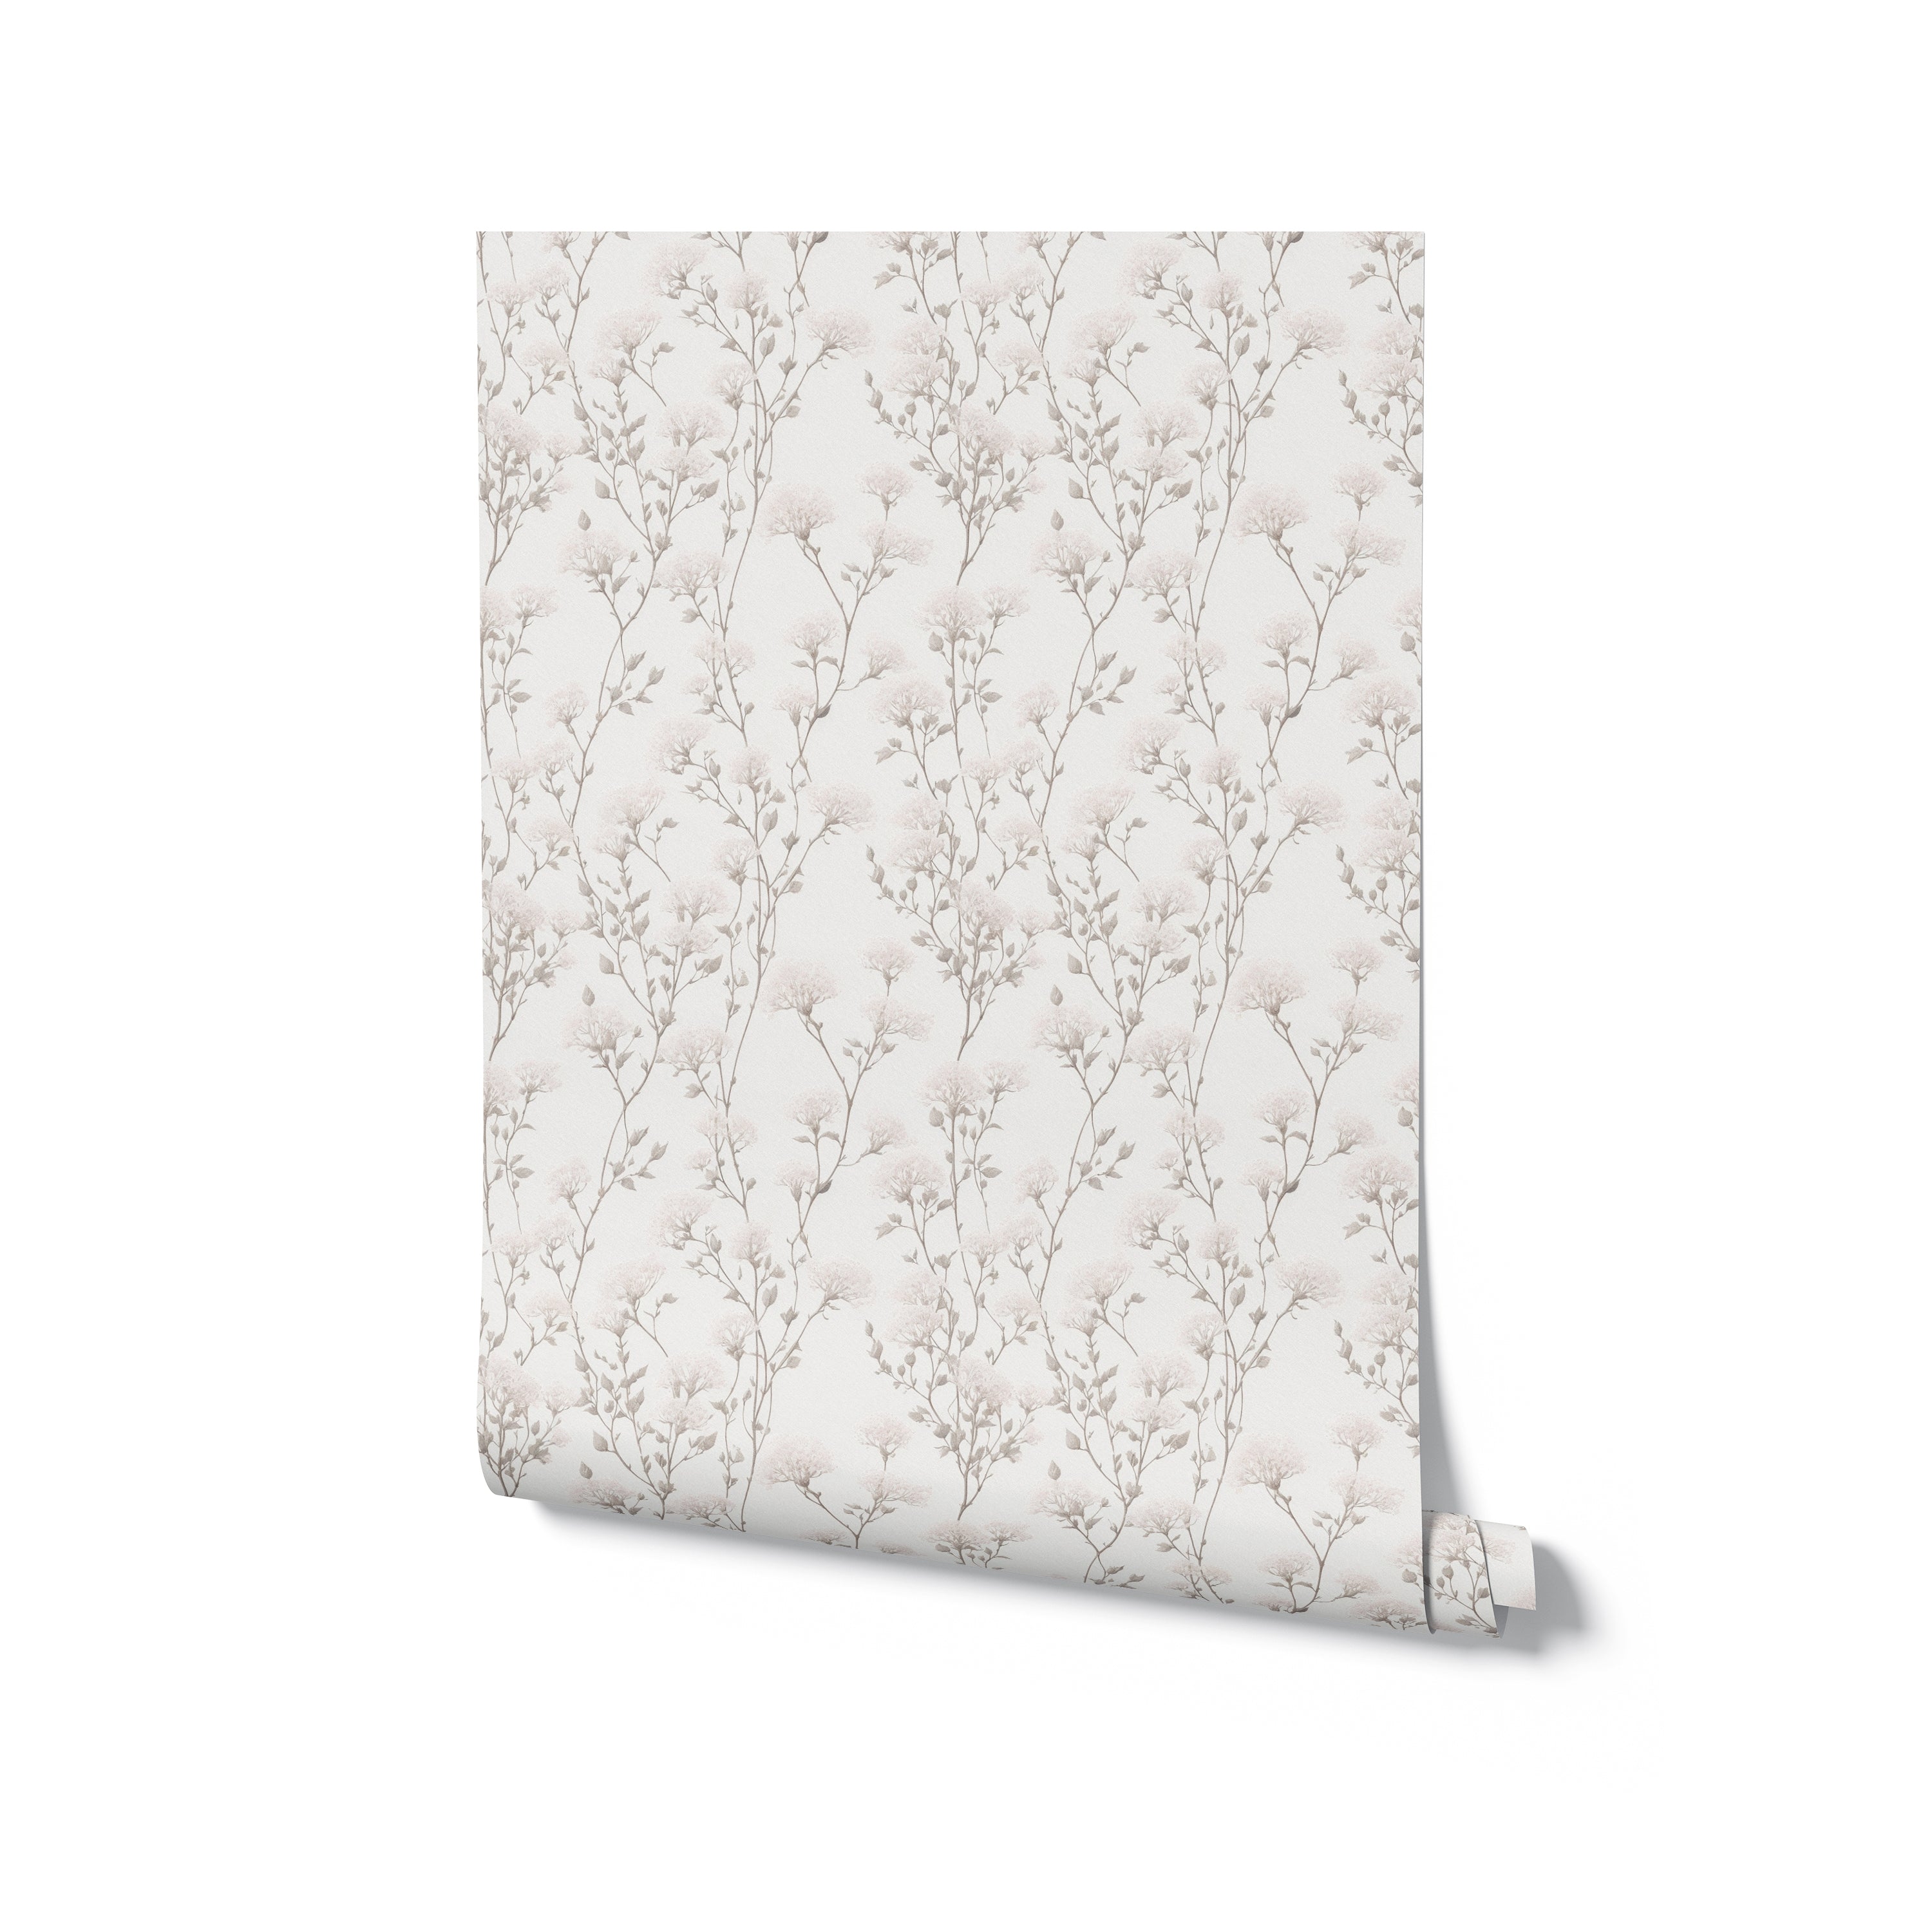 A rolled-up piece of Vintage Floral Reverie Wallpaper displaying the pattern of stylized florals and branches, ready to transform any room with its elegant vintage-inspired design and subtle color palette